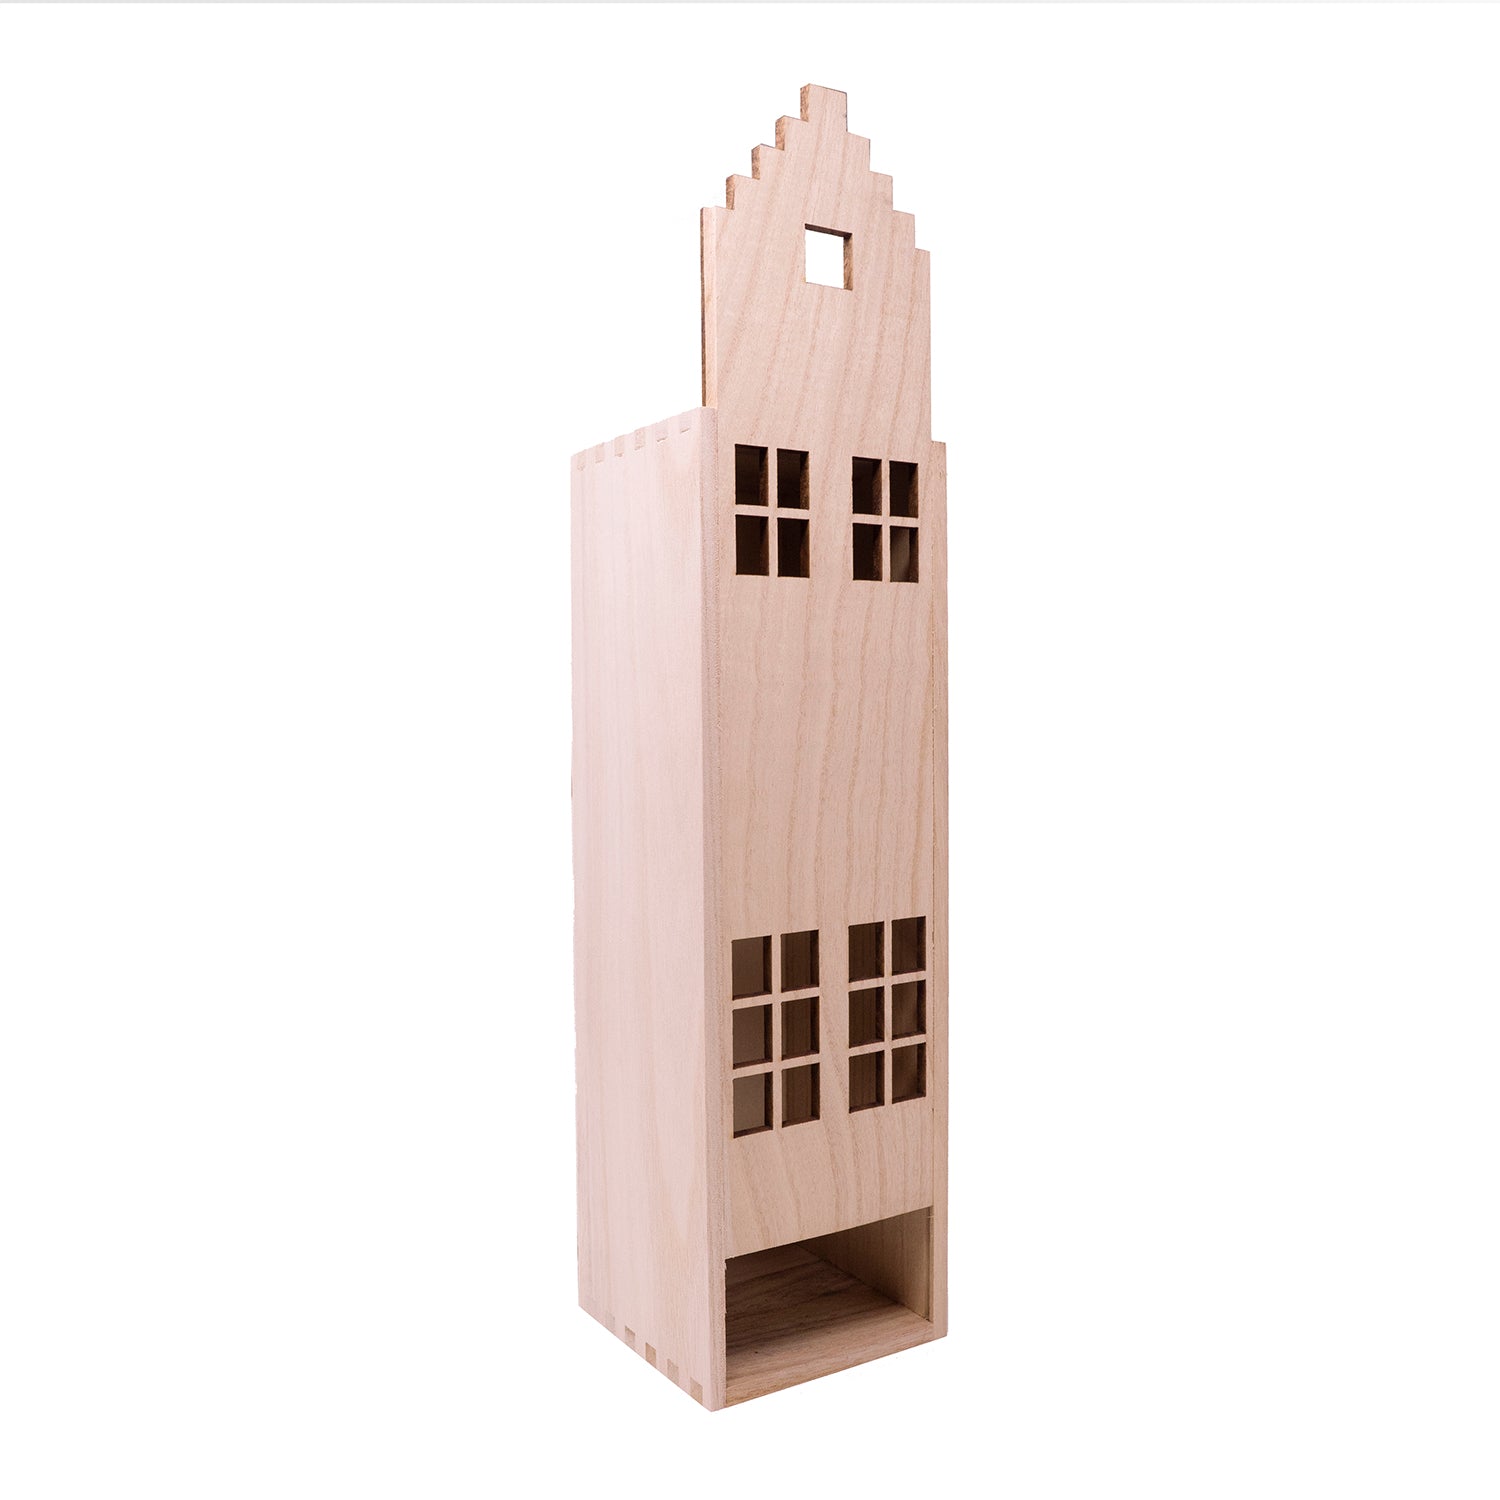 Wine box | Canal house stepped gable